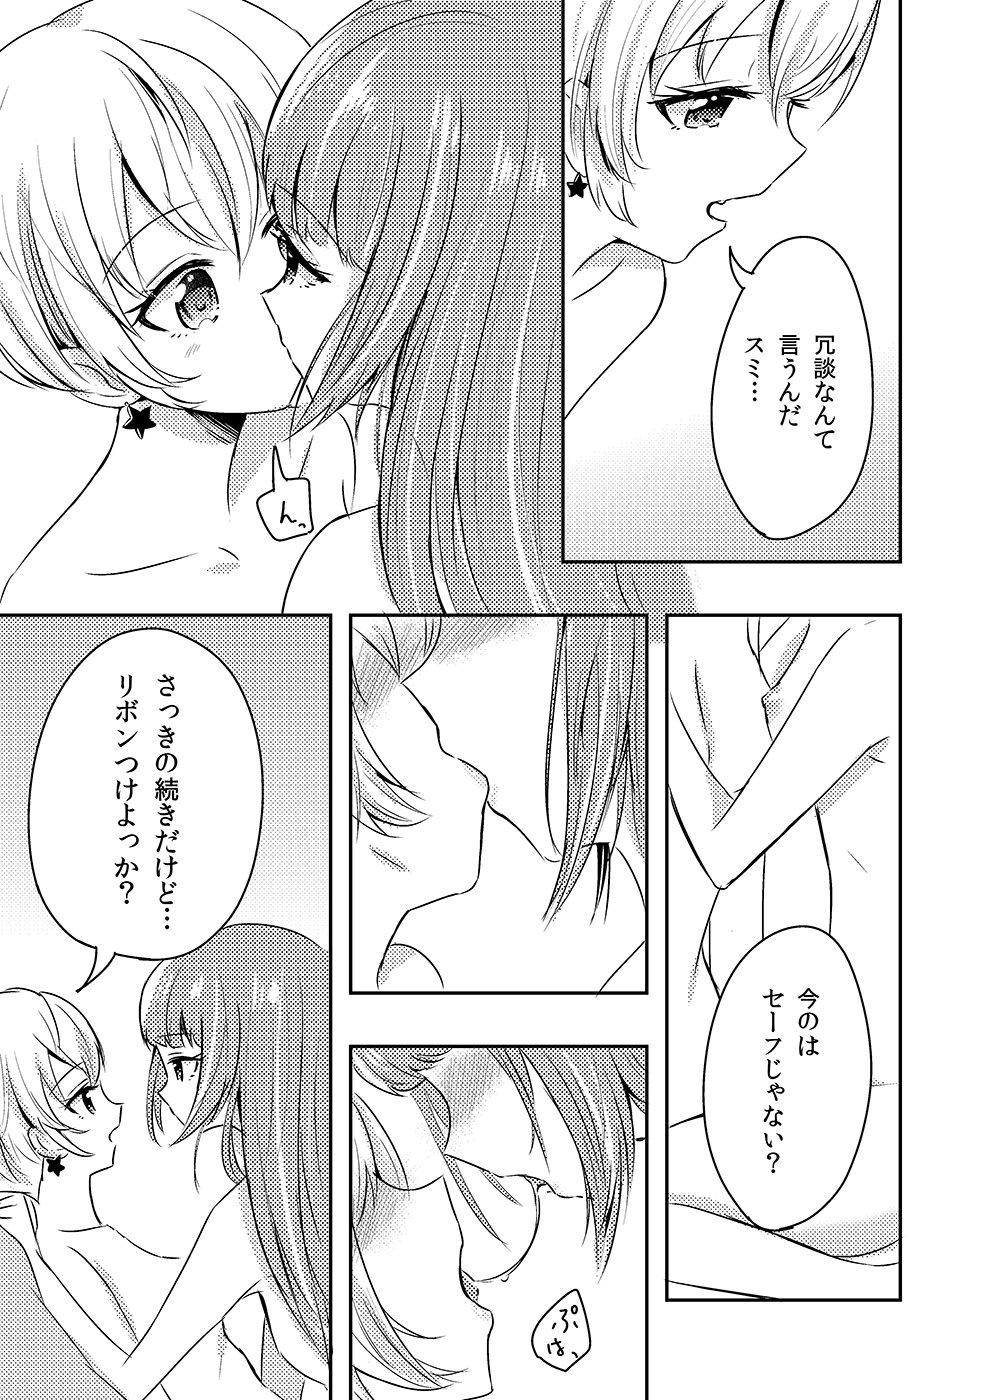 Gay Brokenboys Who contributed to loveless sex joint two years ago! Yuusumi manga. - Aikatsu Cumshots - Picture 3